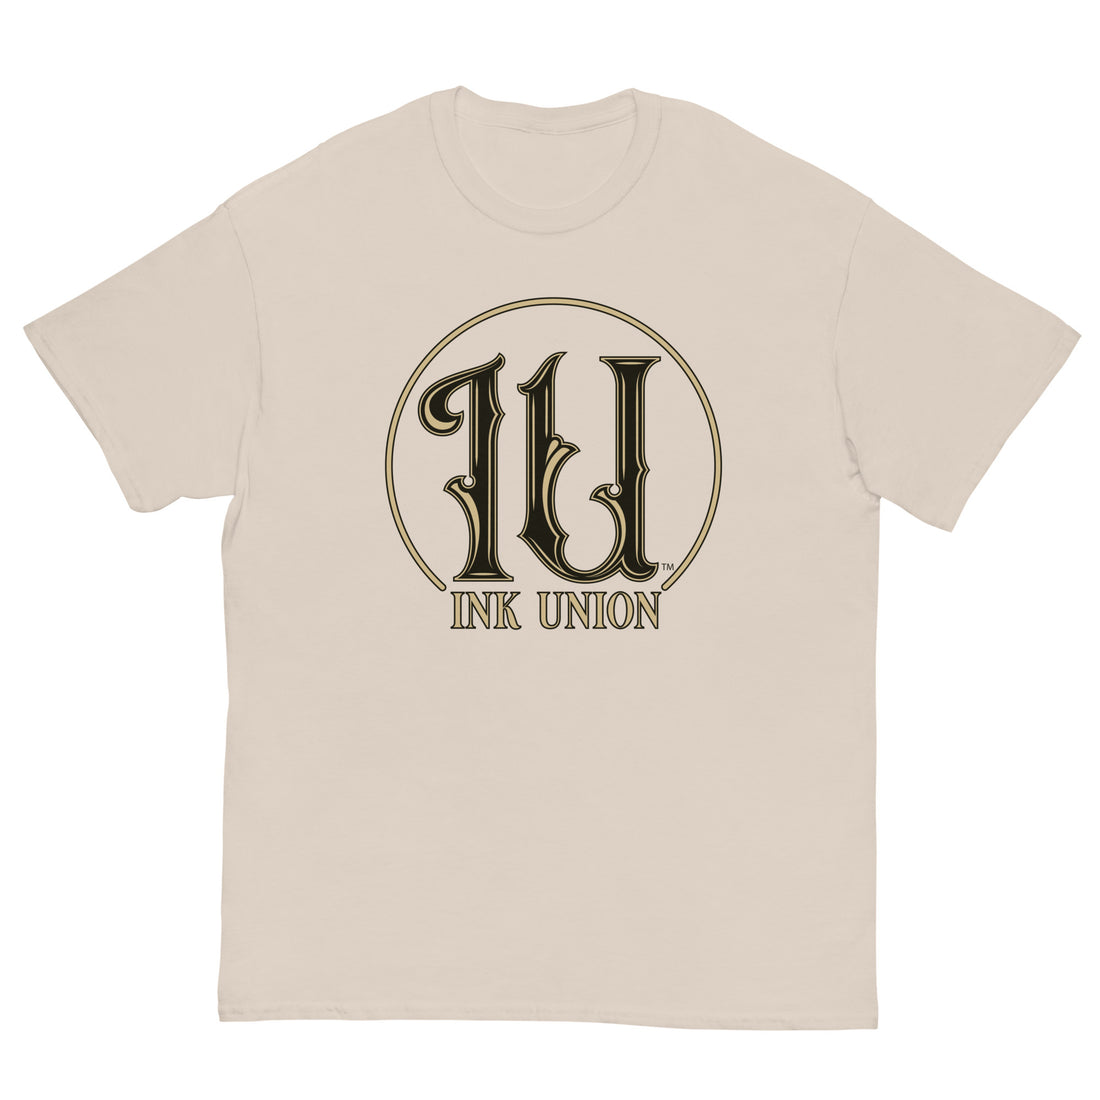 Ink Union Clothing Co. beige t-shirt featuring the Ink Union ring logo in black and gold.